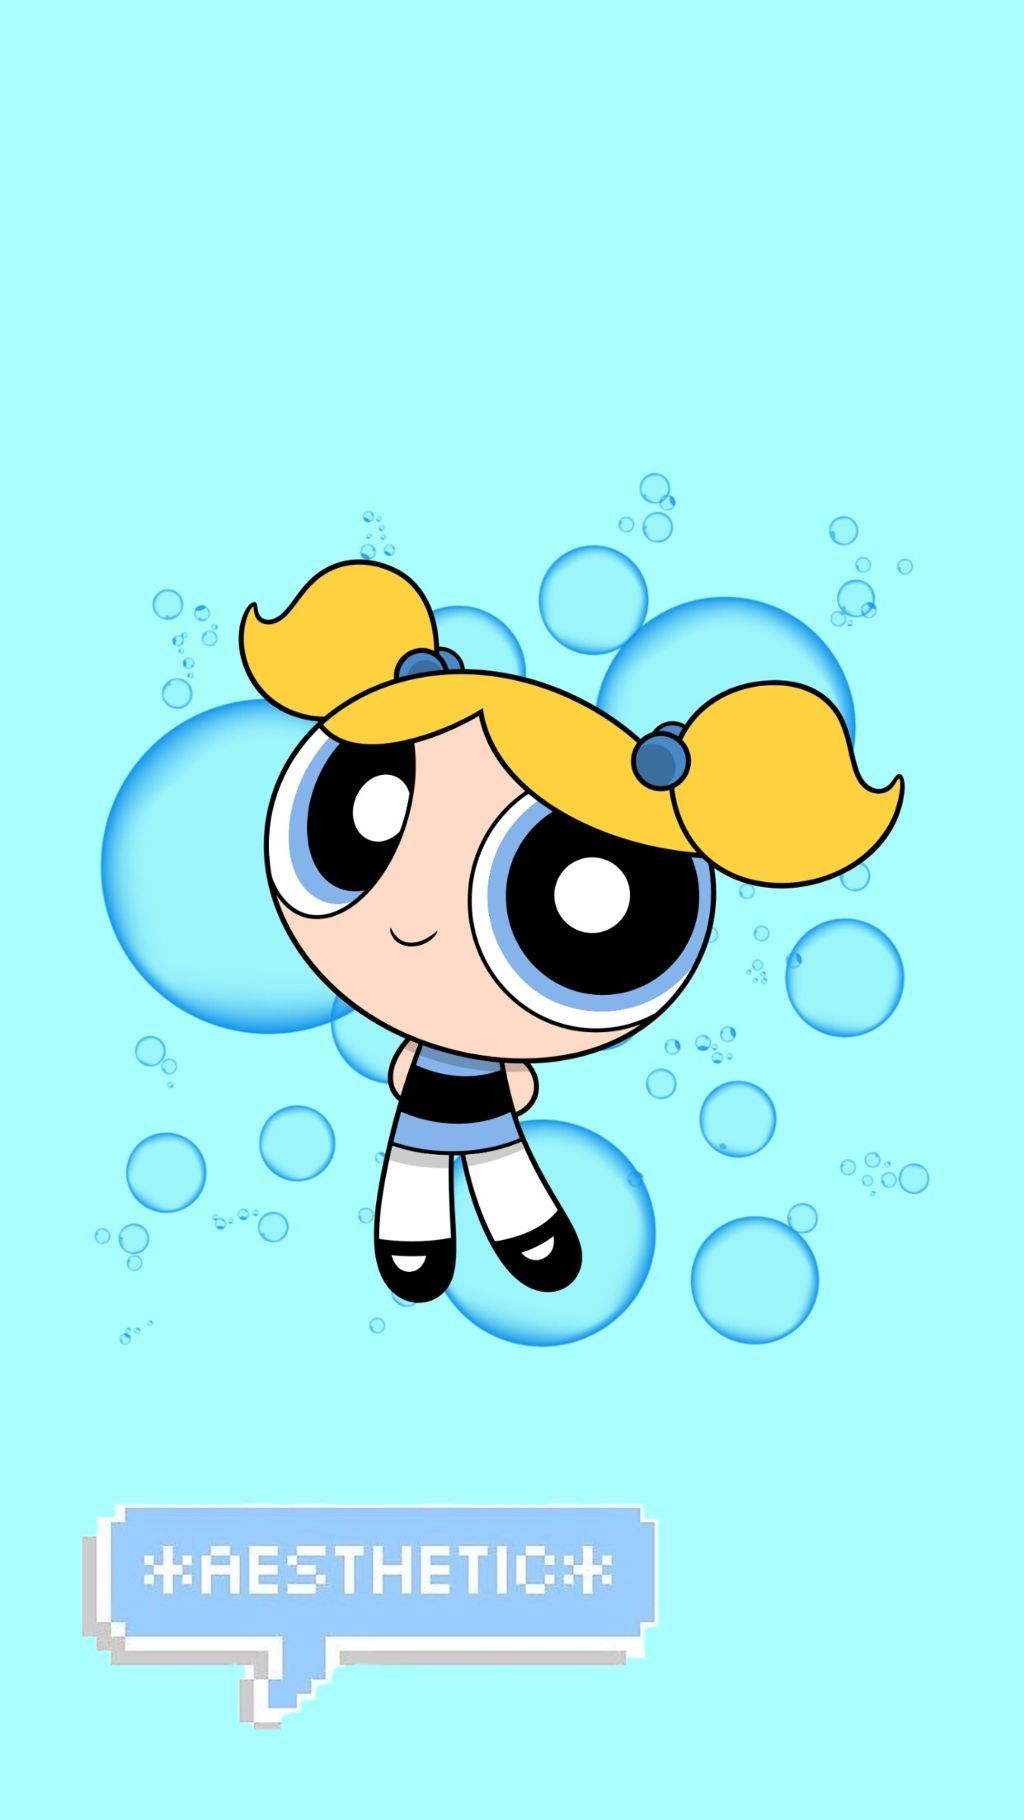 Powerpuff Girls Bubbles wallpaper I made for my phone! - Bubbles